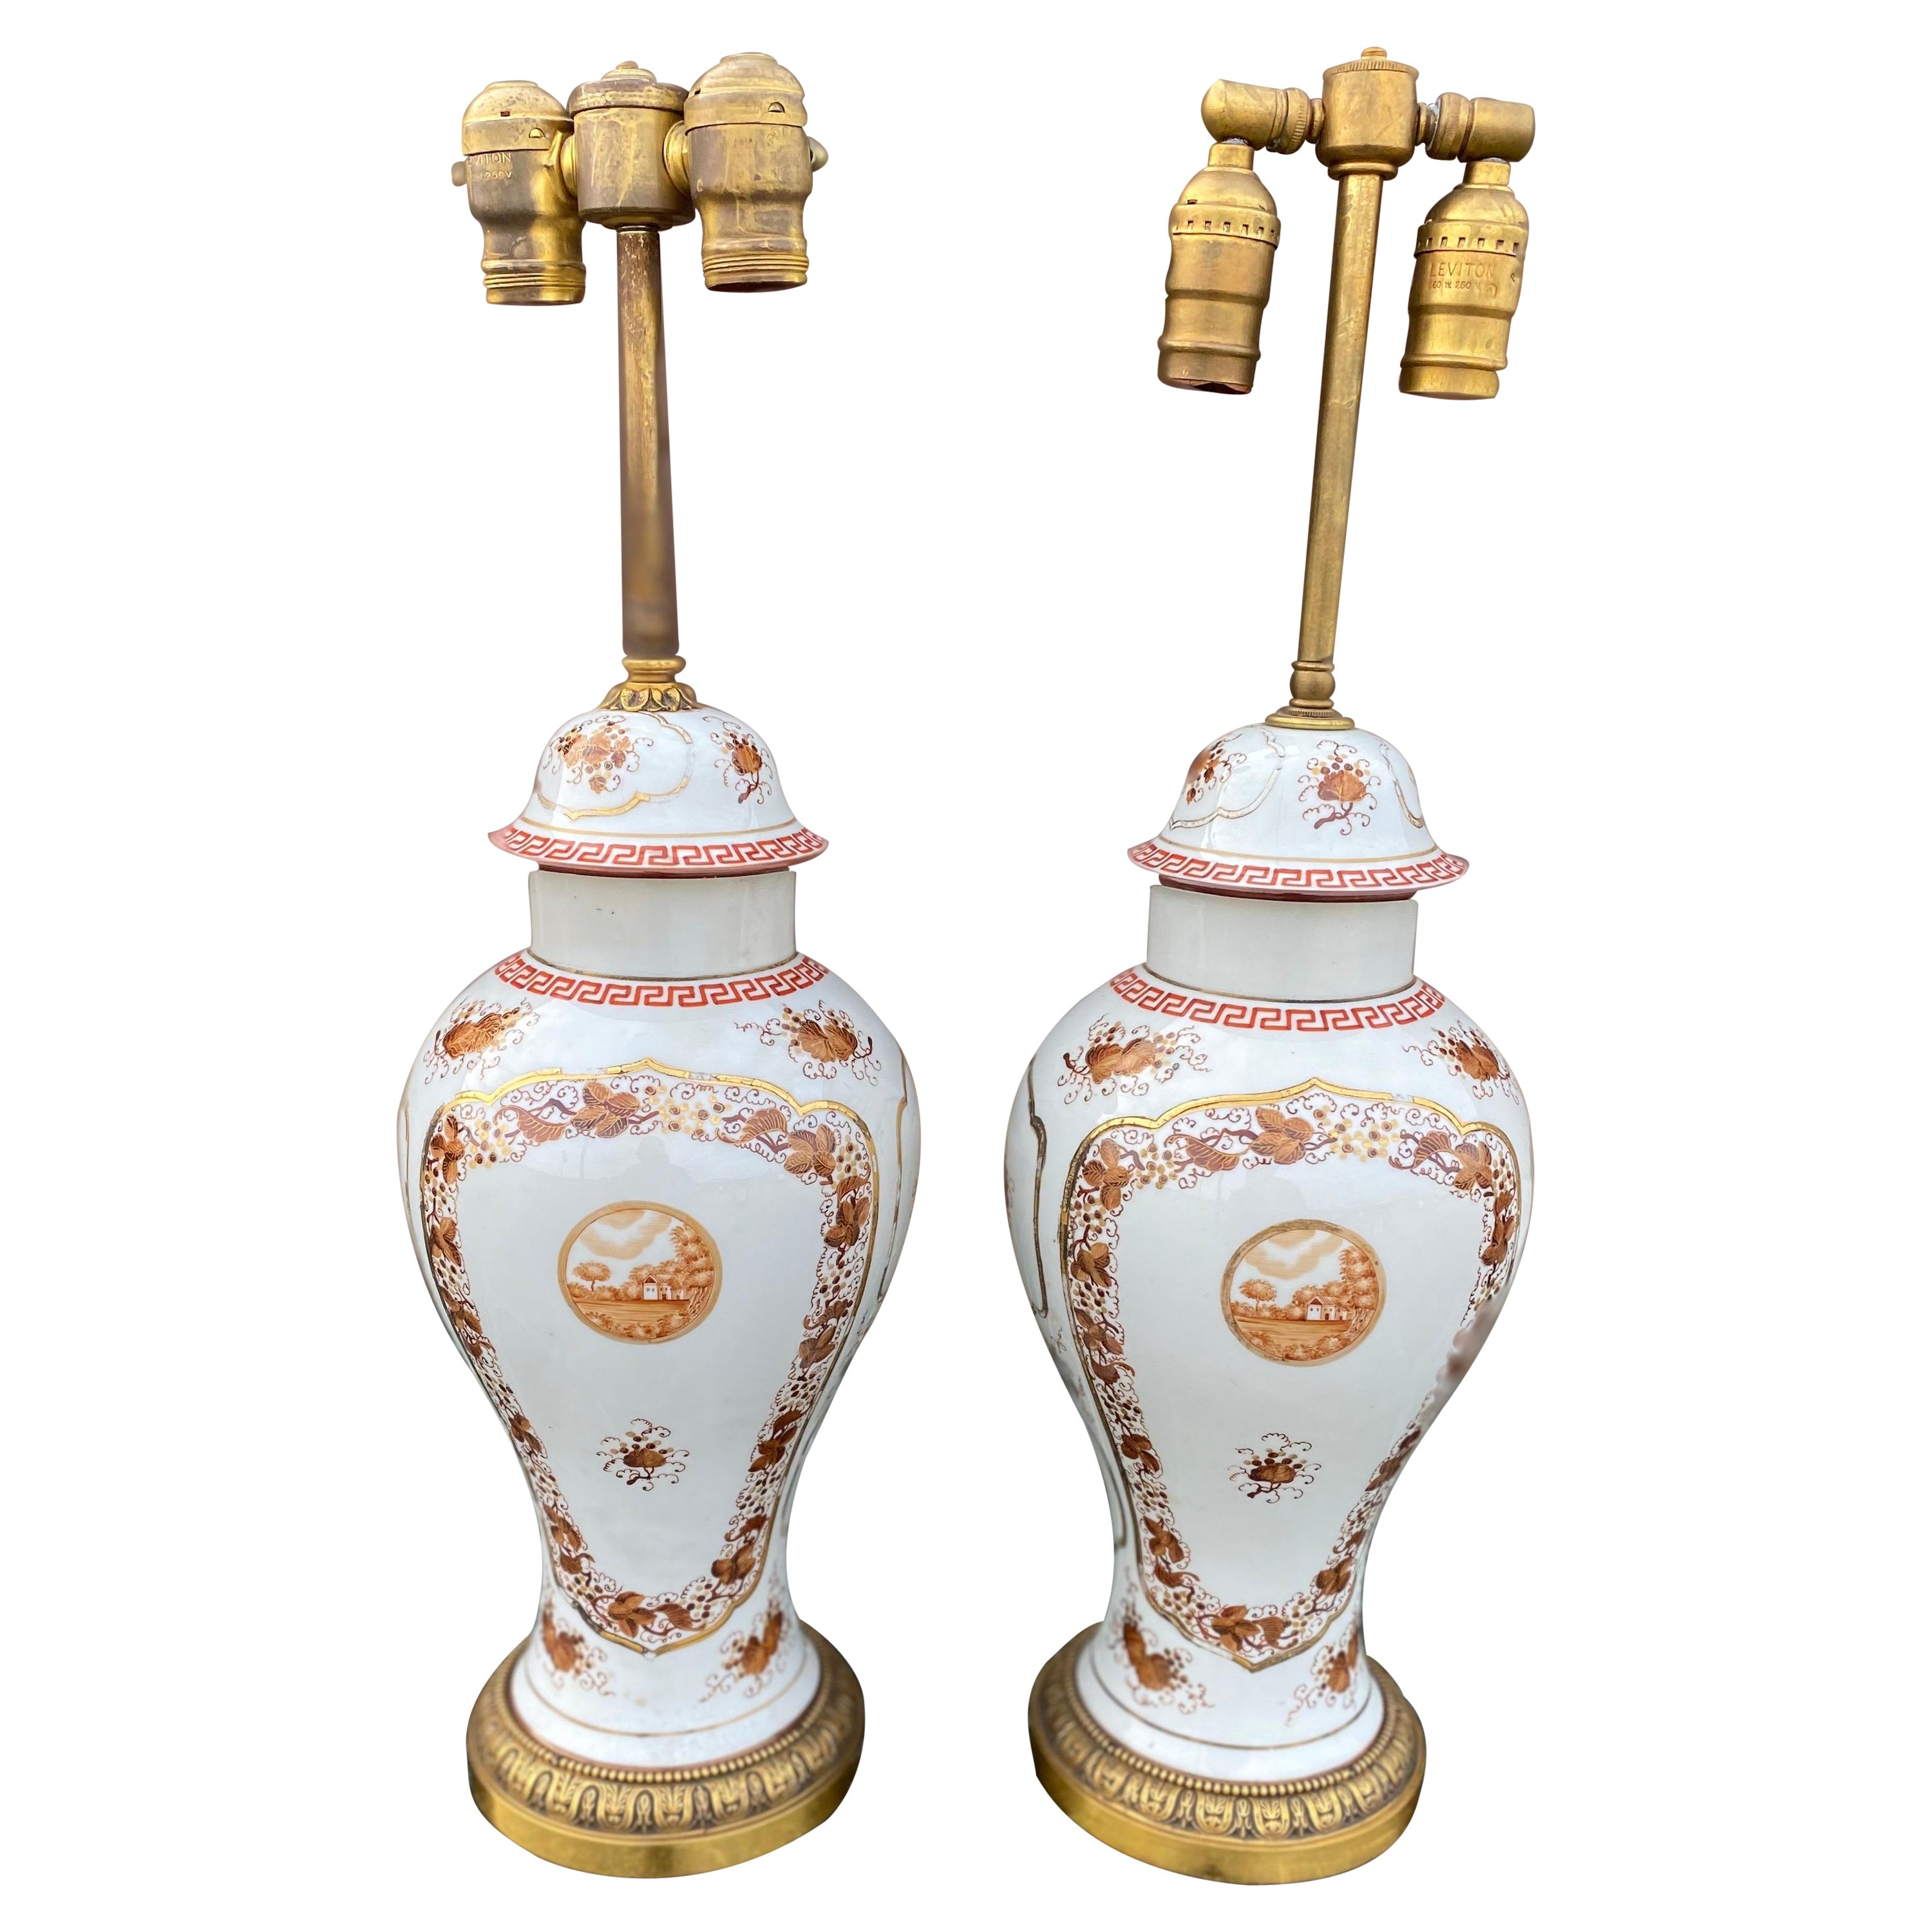 Chinese Export Based Mounted as Lamps, 19th Century